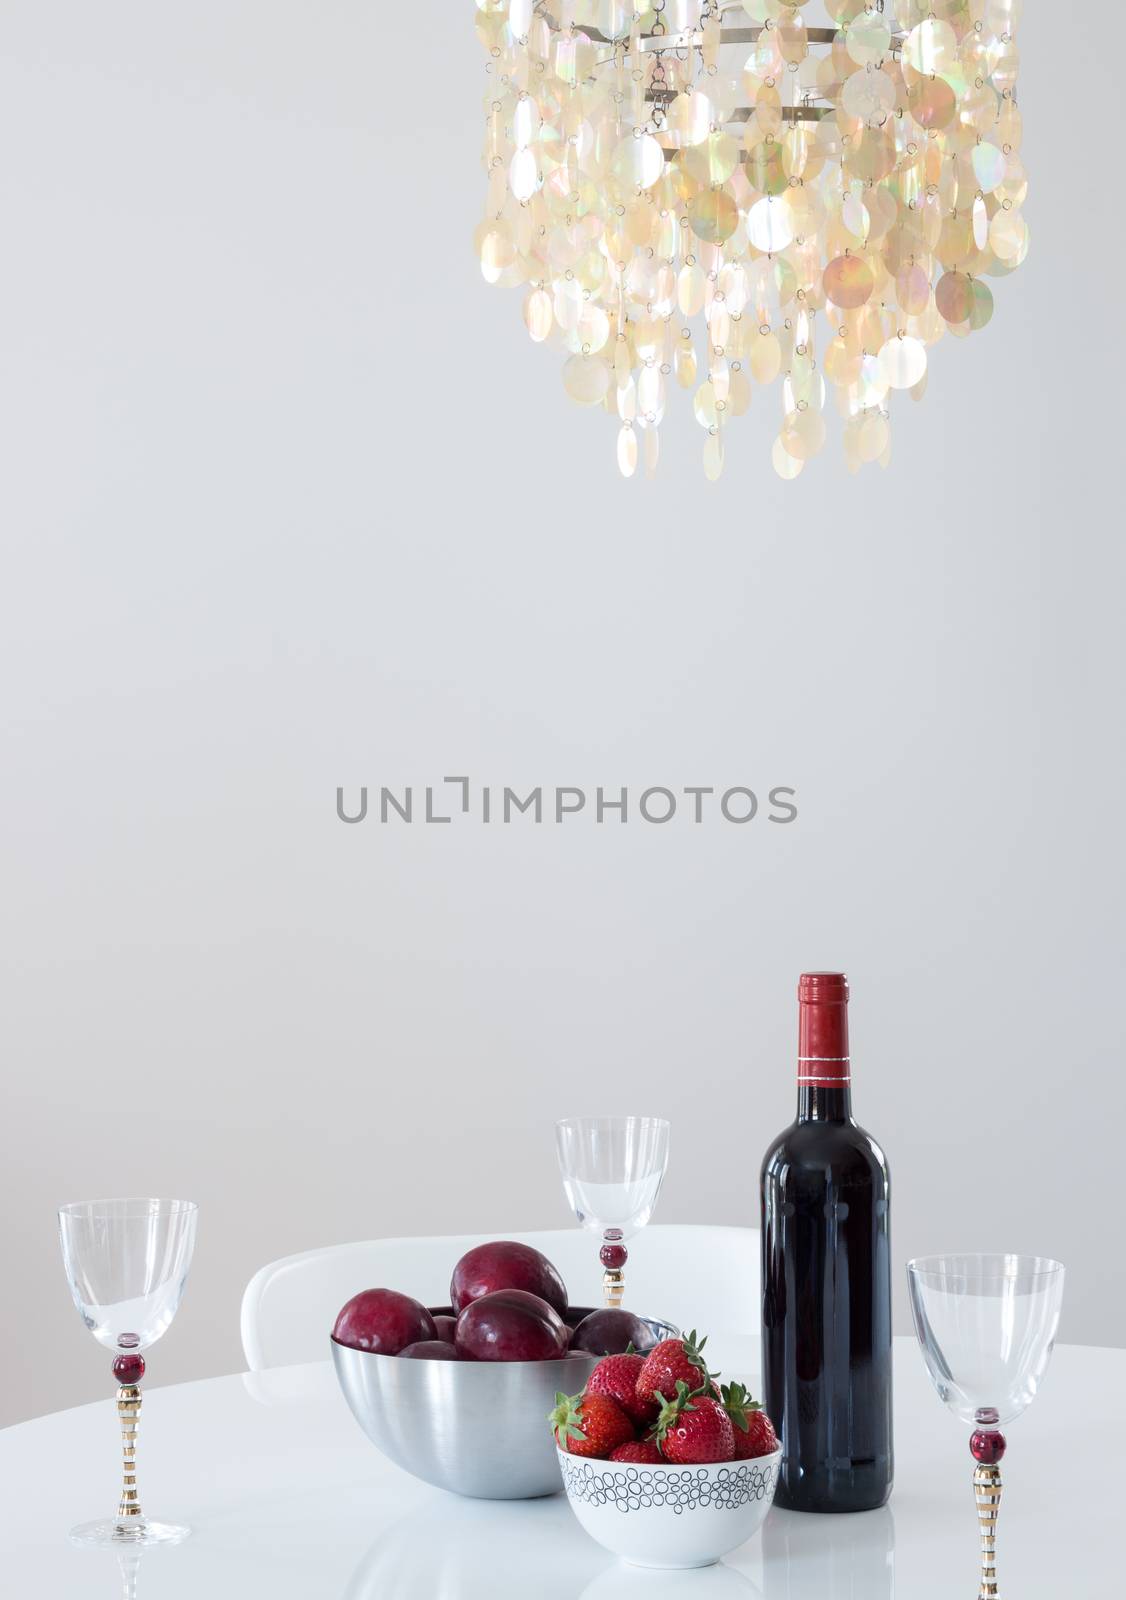 Red wine and fruits on a table, in a room decorated with beautiful chandelier.